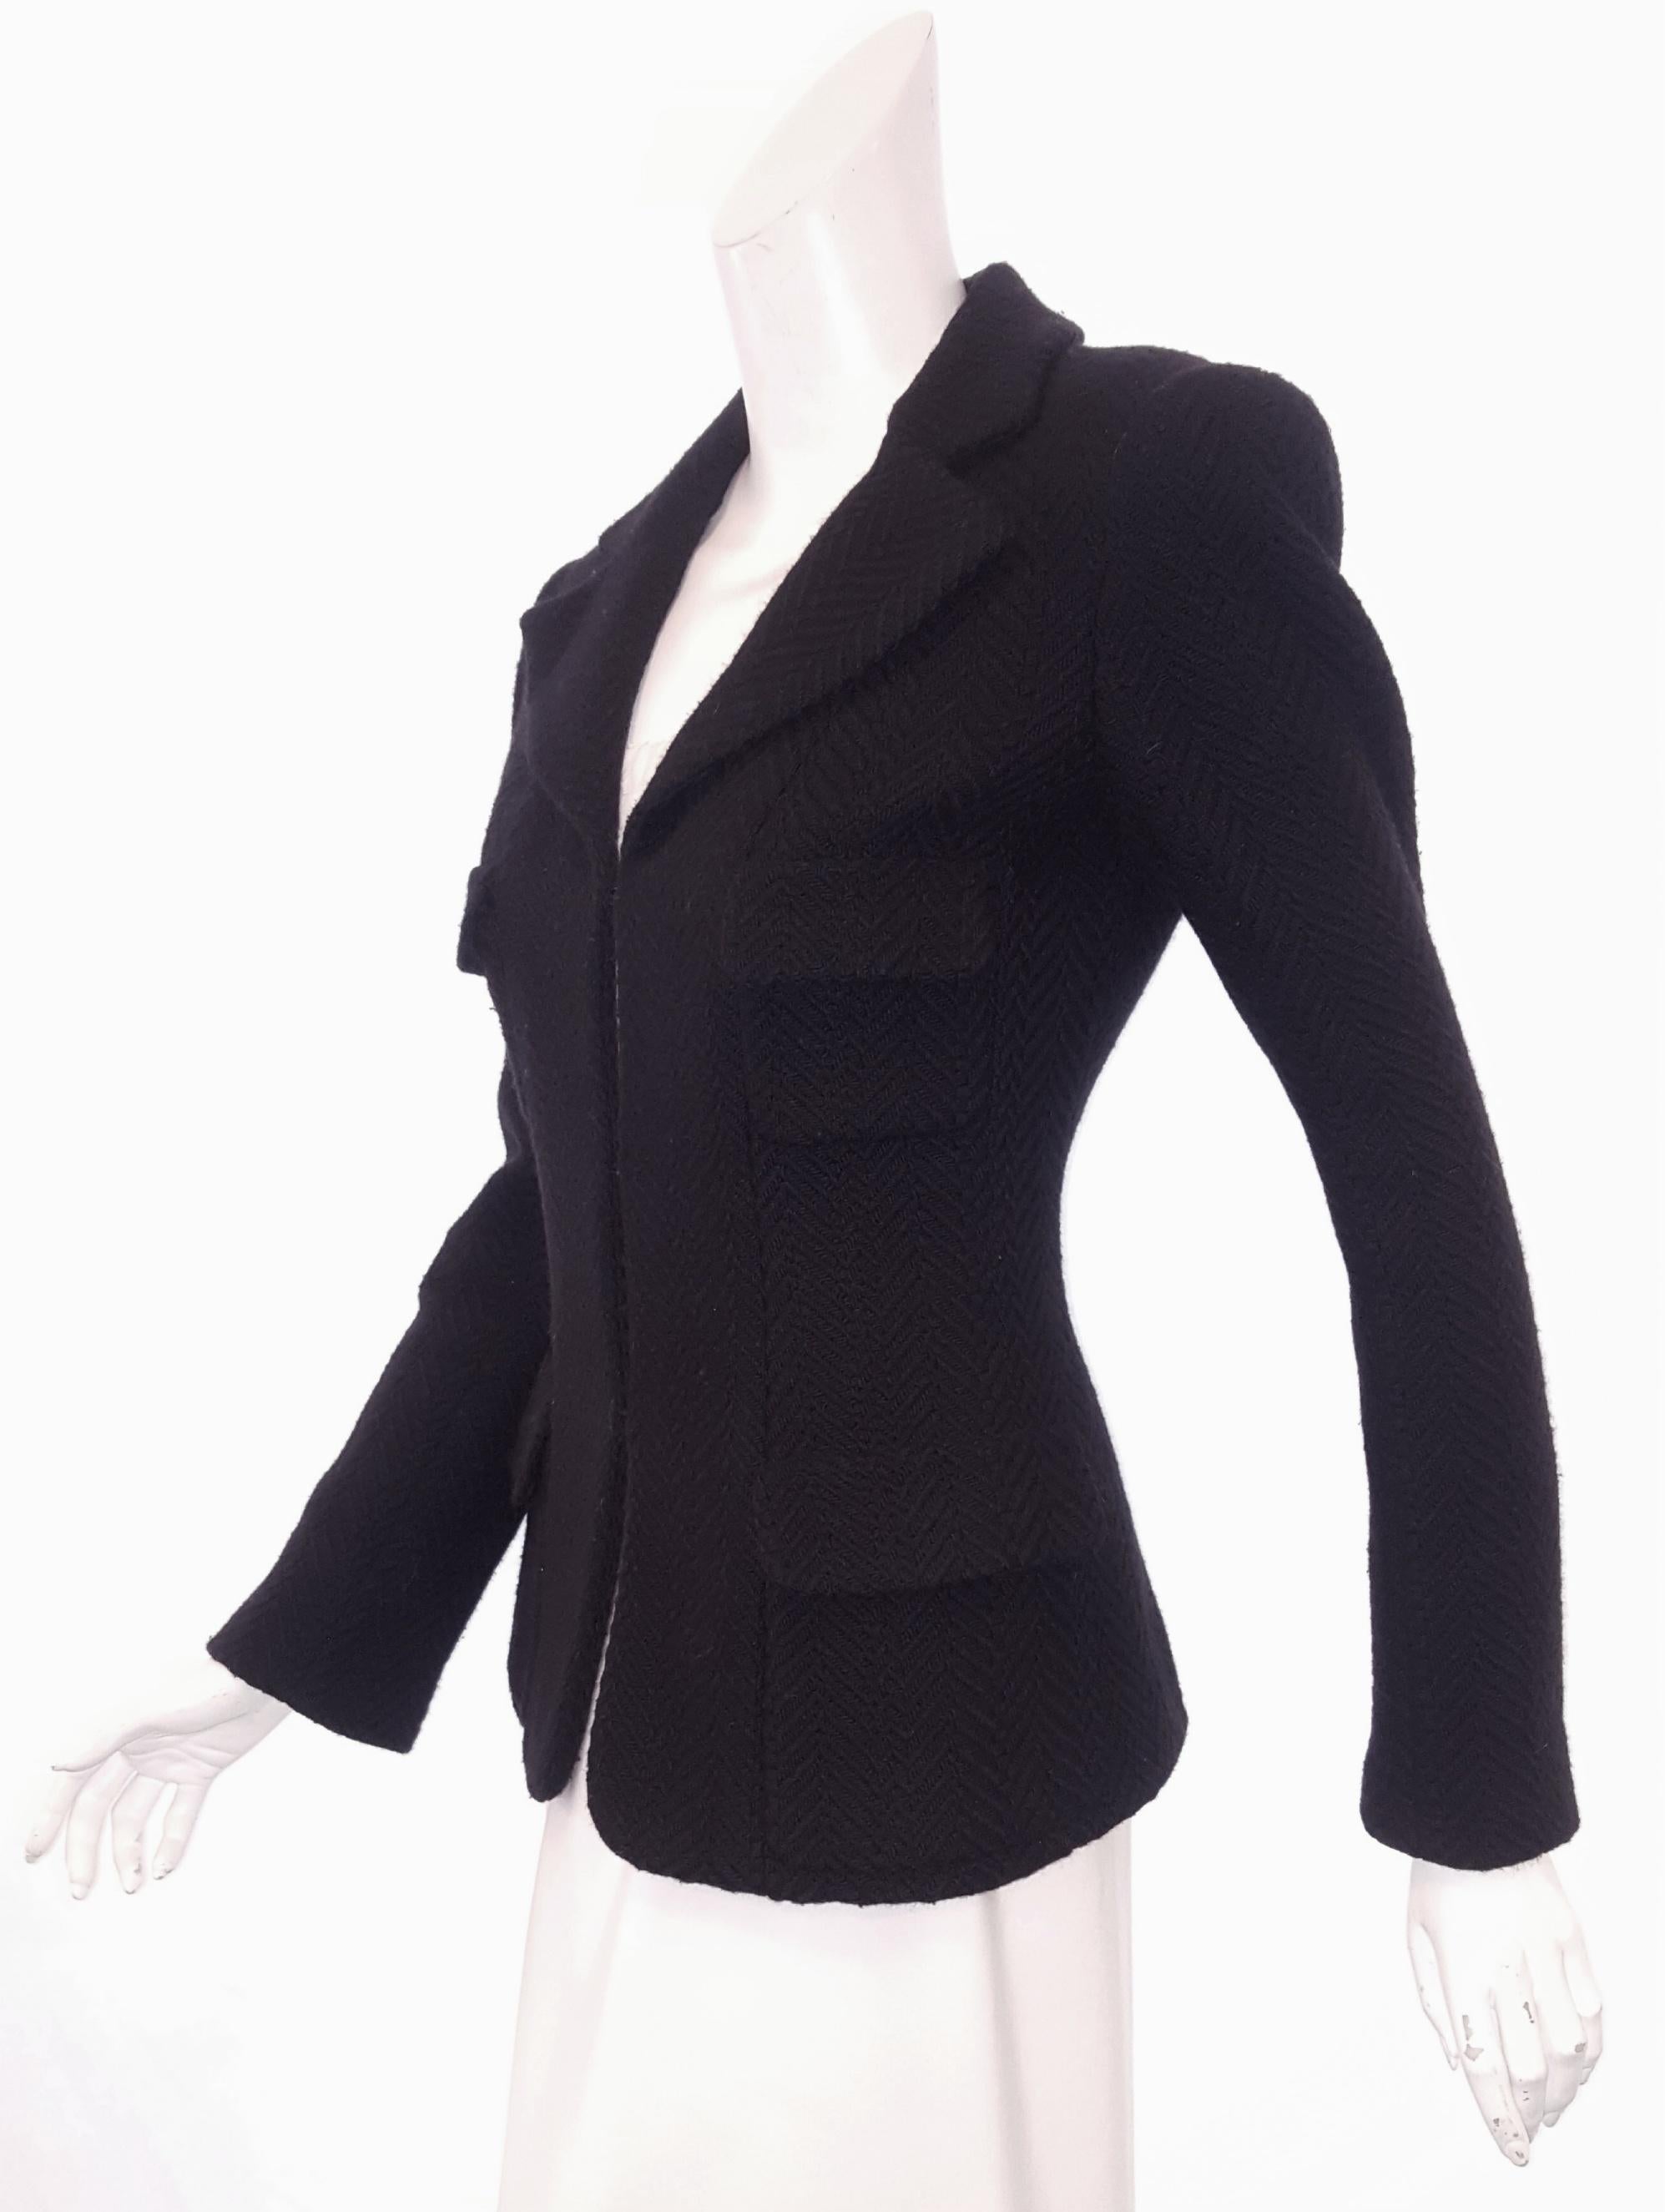 Chanel Black Herringbone Wool 2006 Fall Collection Jacket 40 In Excellent Condition For Sale In Palm Beach, FL